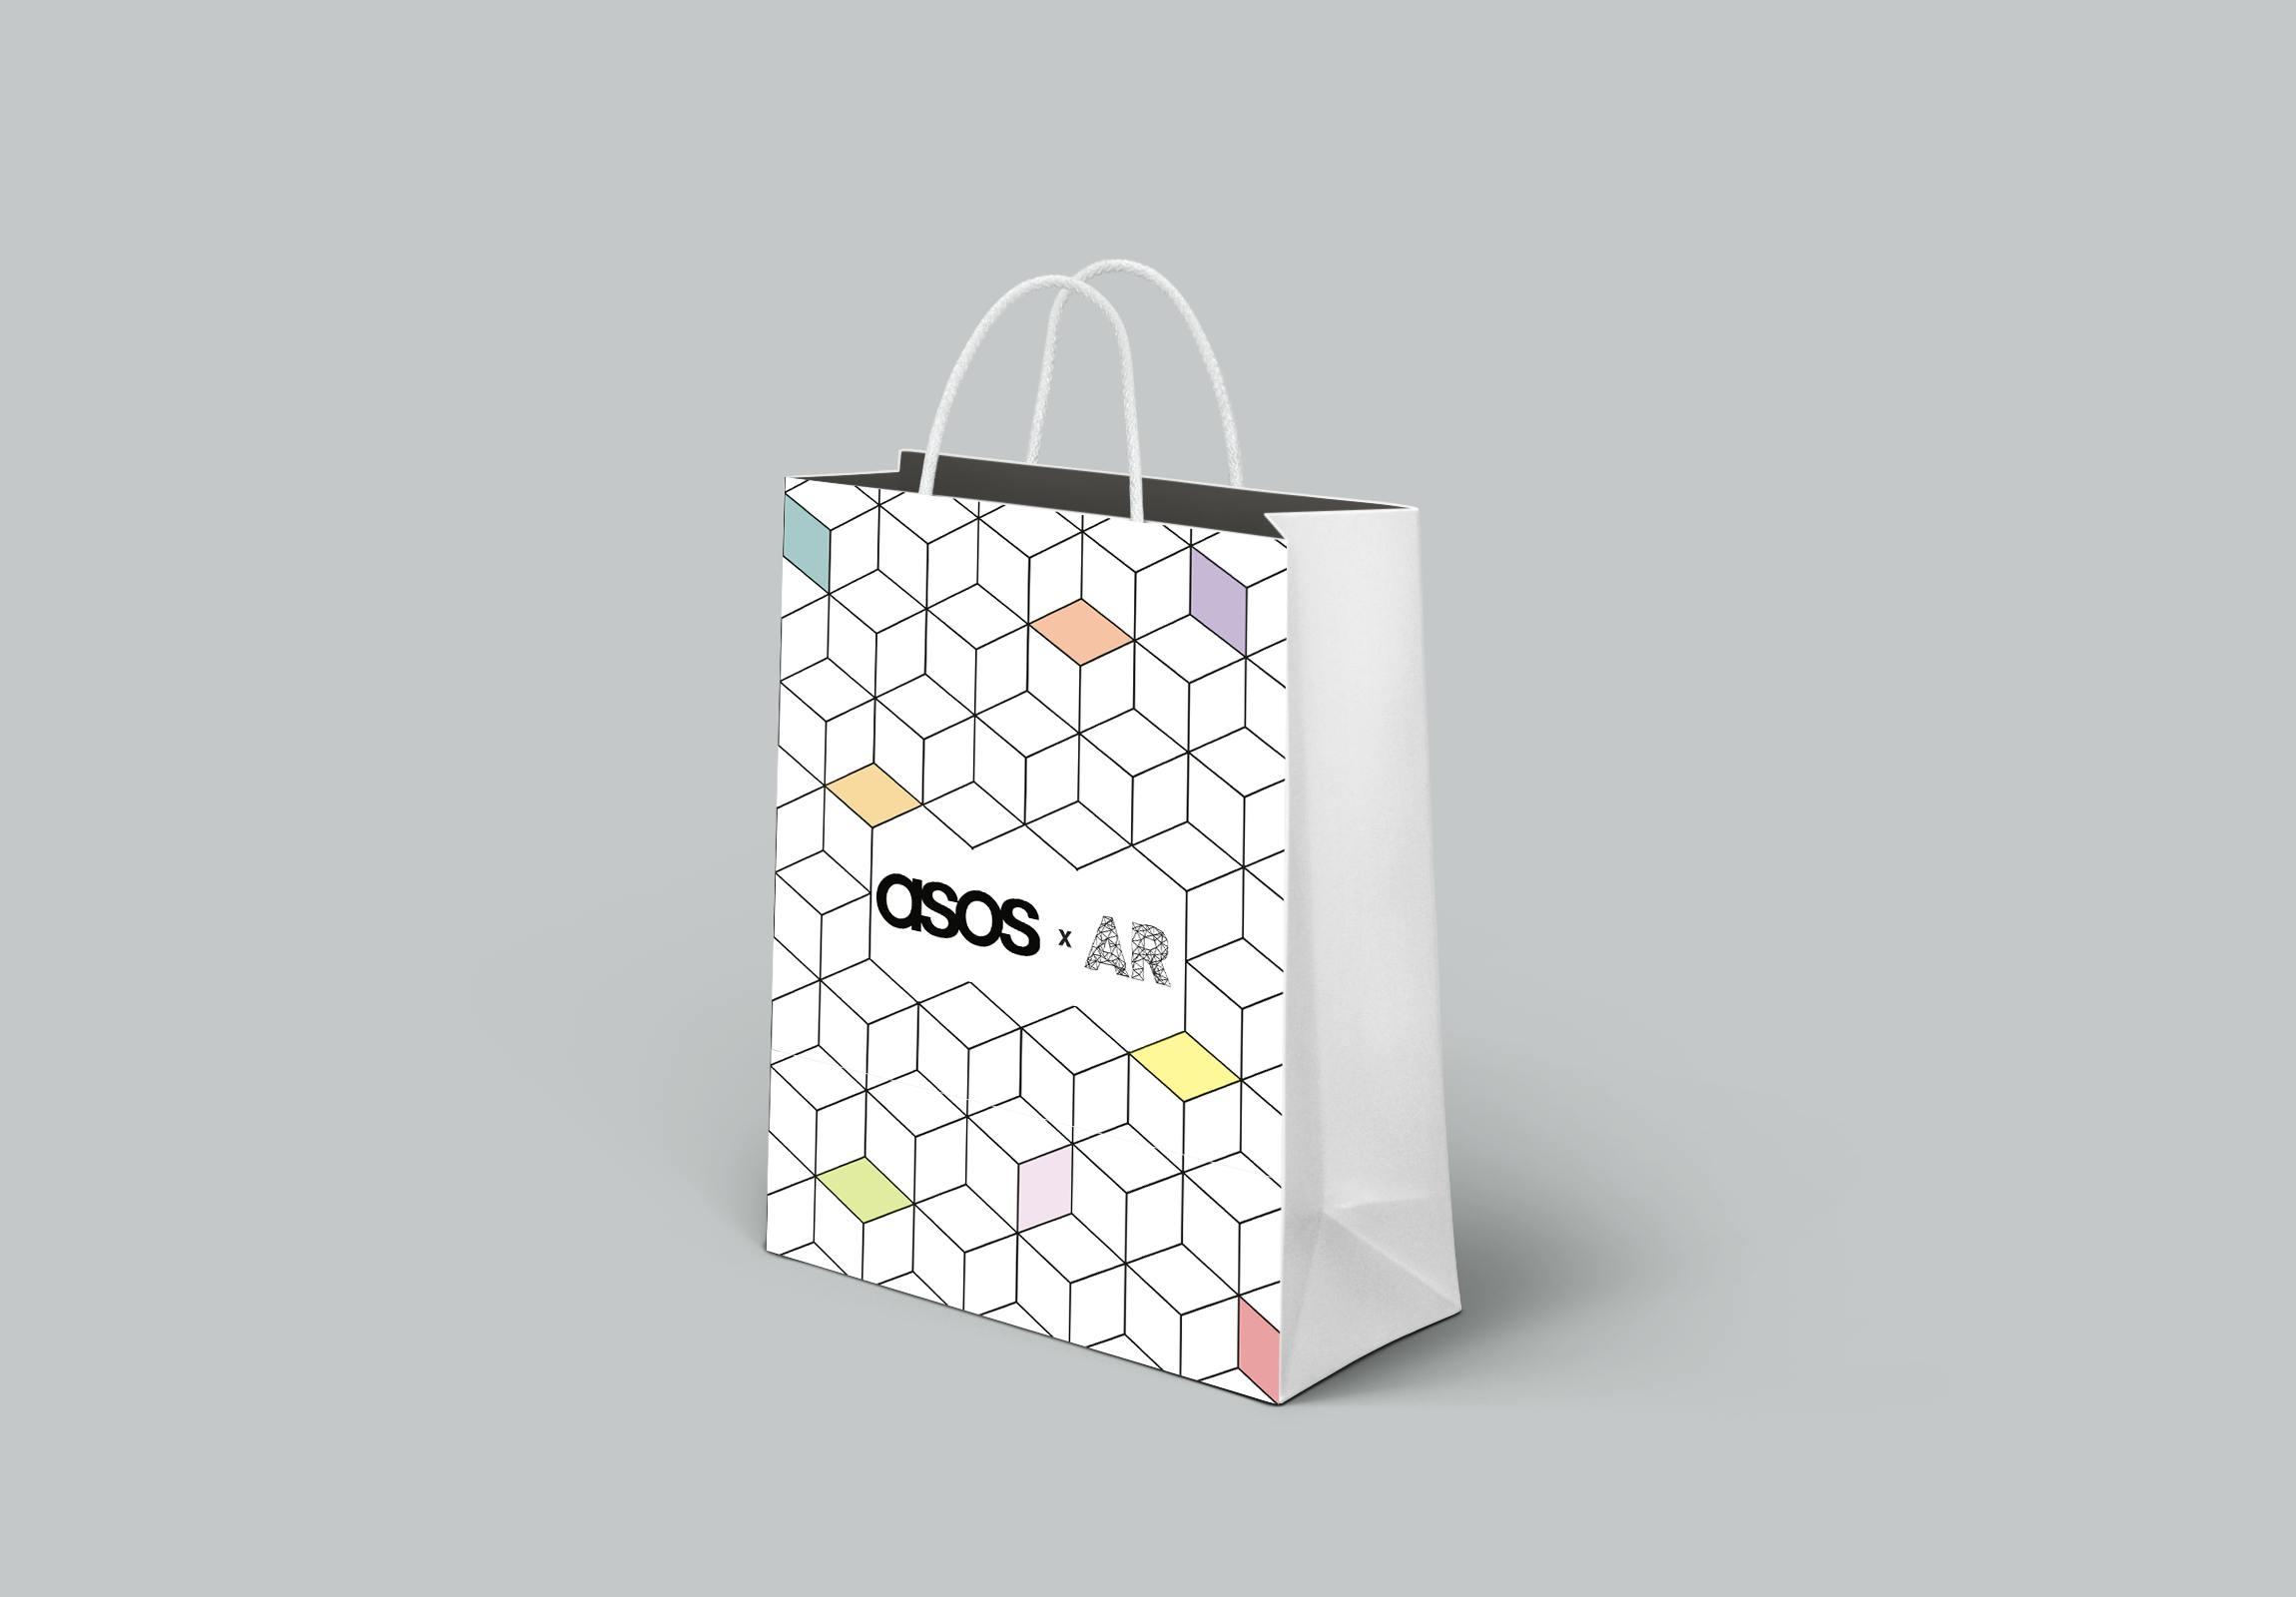 Carrier bag design for the event 